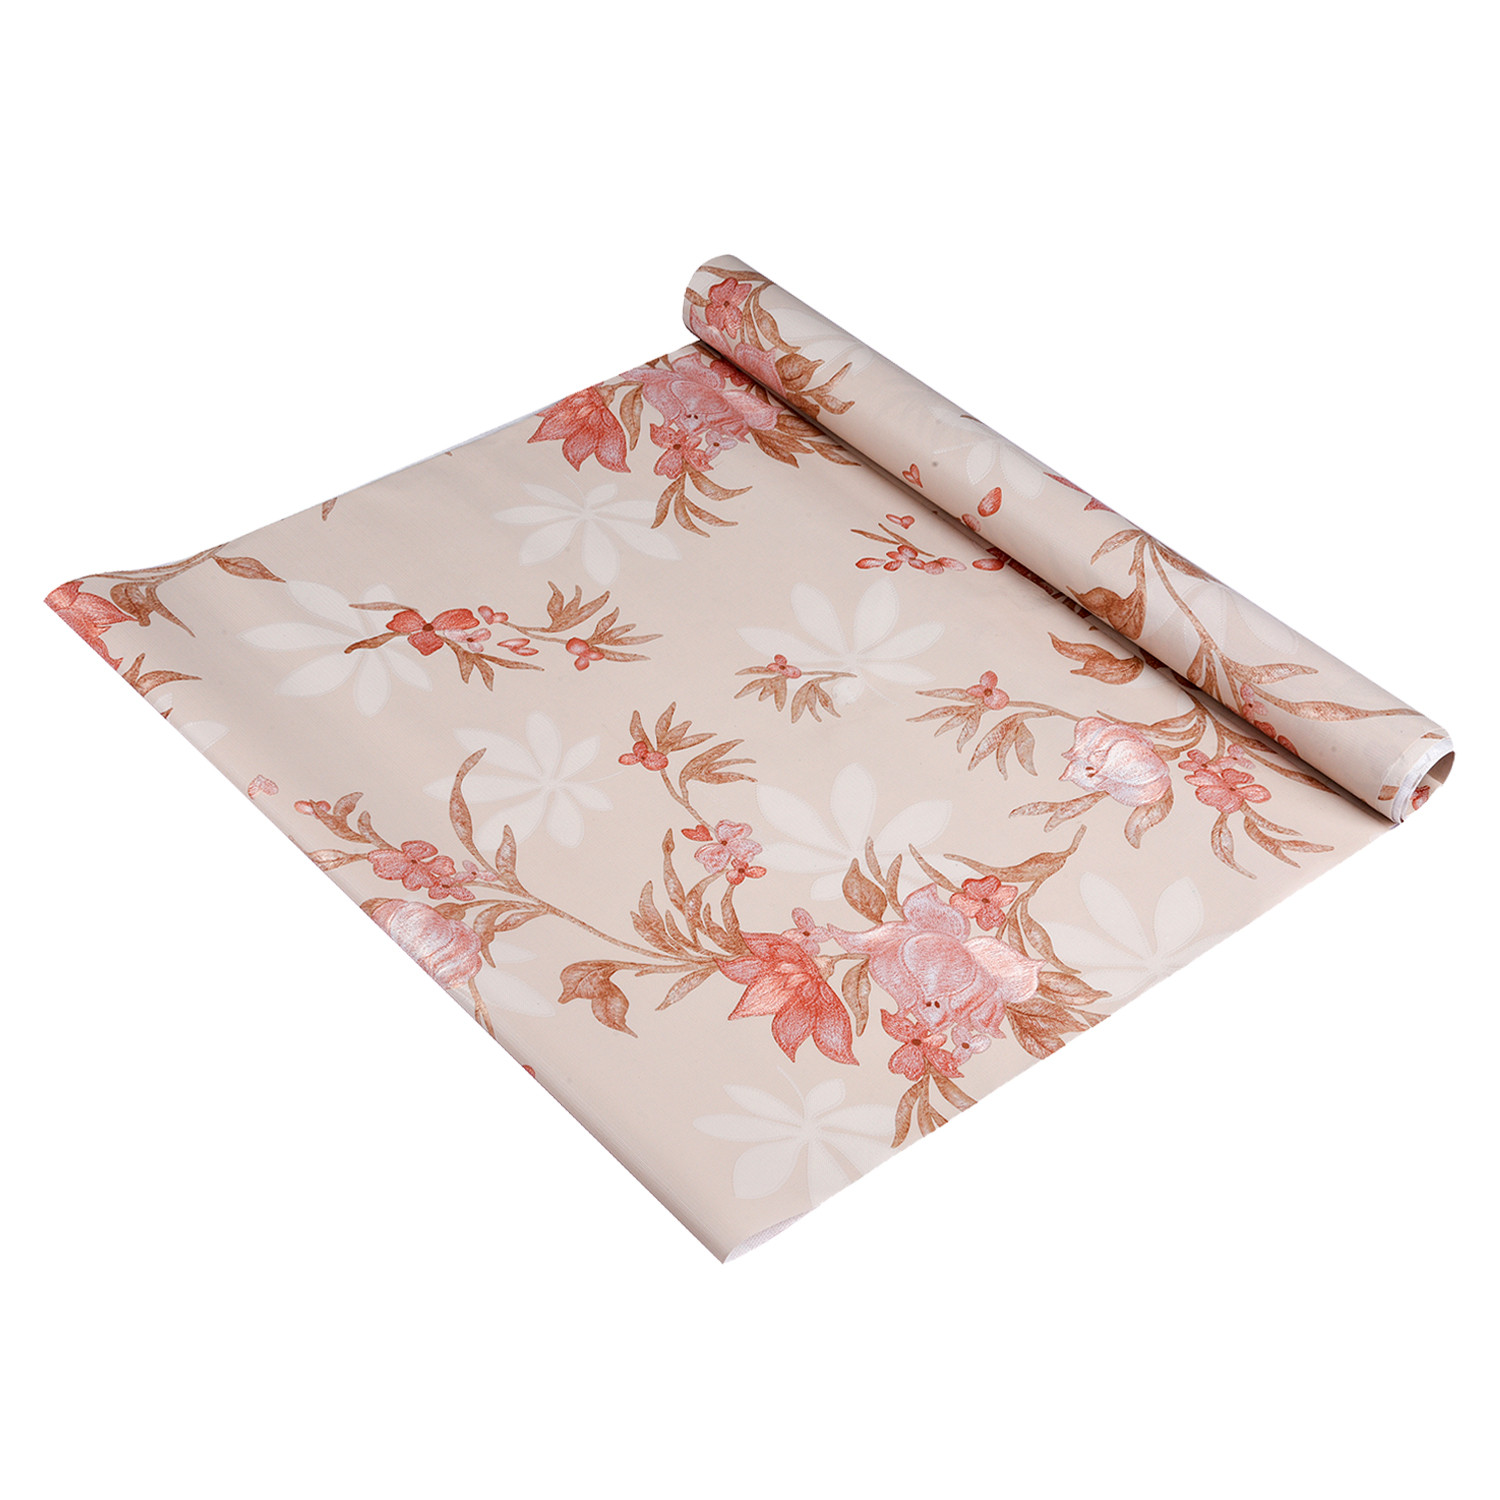 Kuber Industries Shelf Liner | Kitchen Cabinet Shelf Protector | Kitchen Liners for Cabinets and Drawers | Drawer Liner Mat | Red Flower Shelf Liner Roll | Cabinet Mat | 3 MTR | Cream